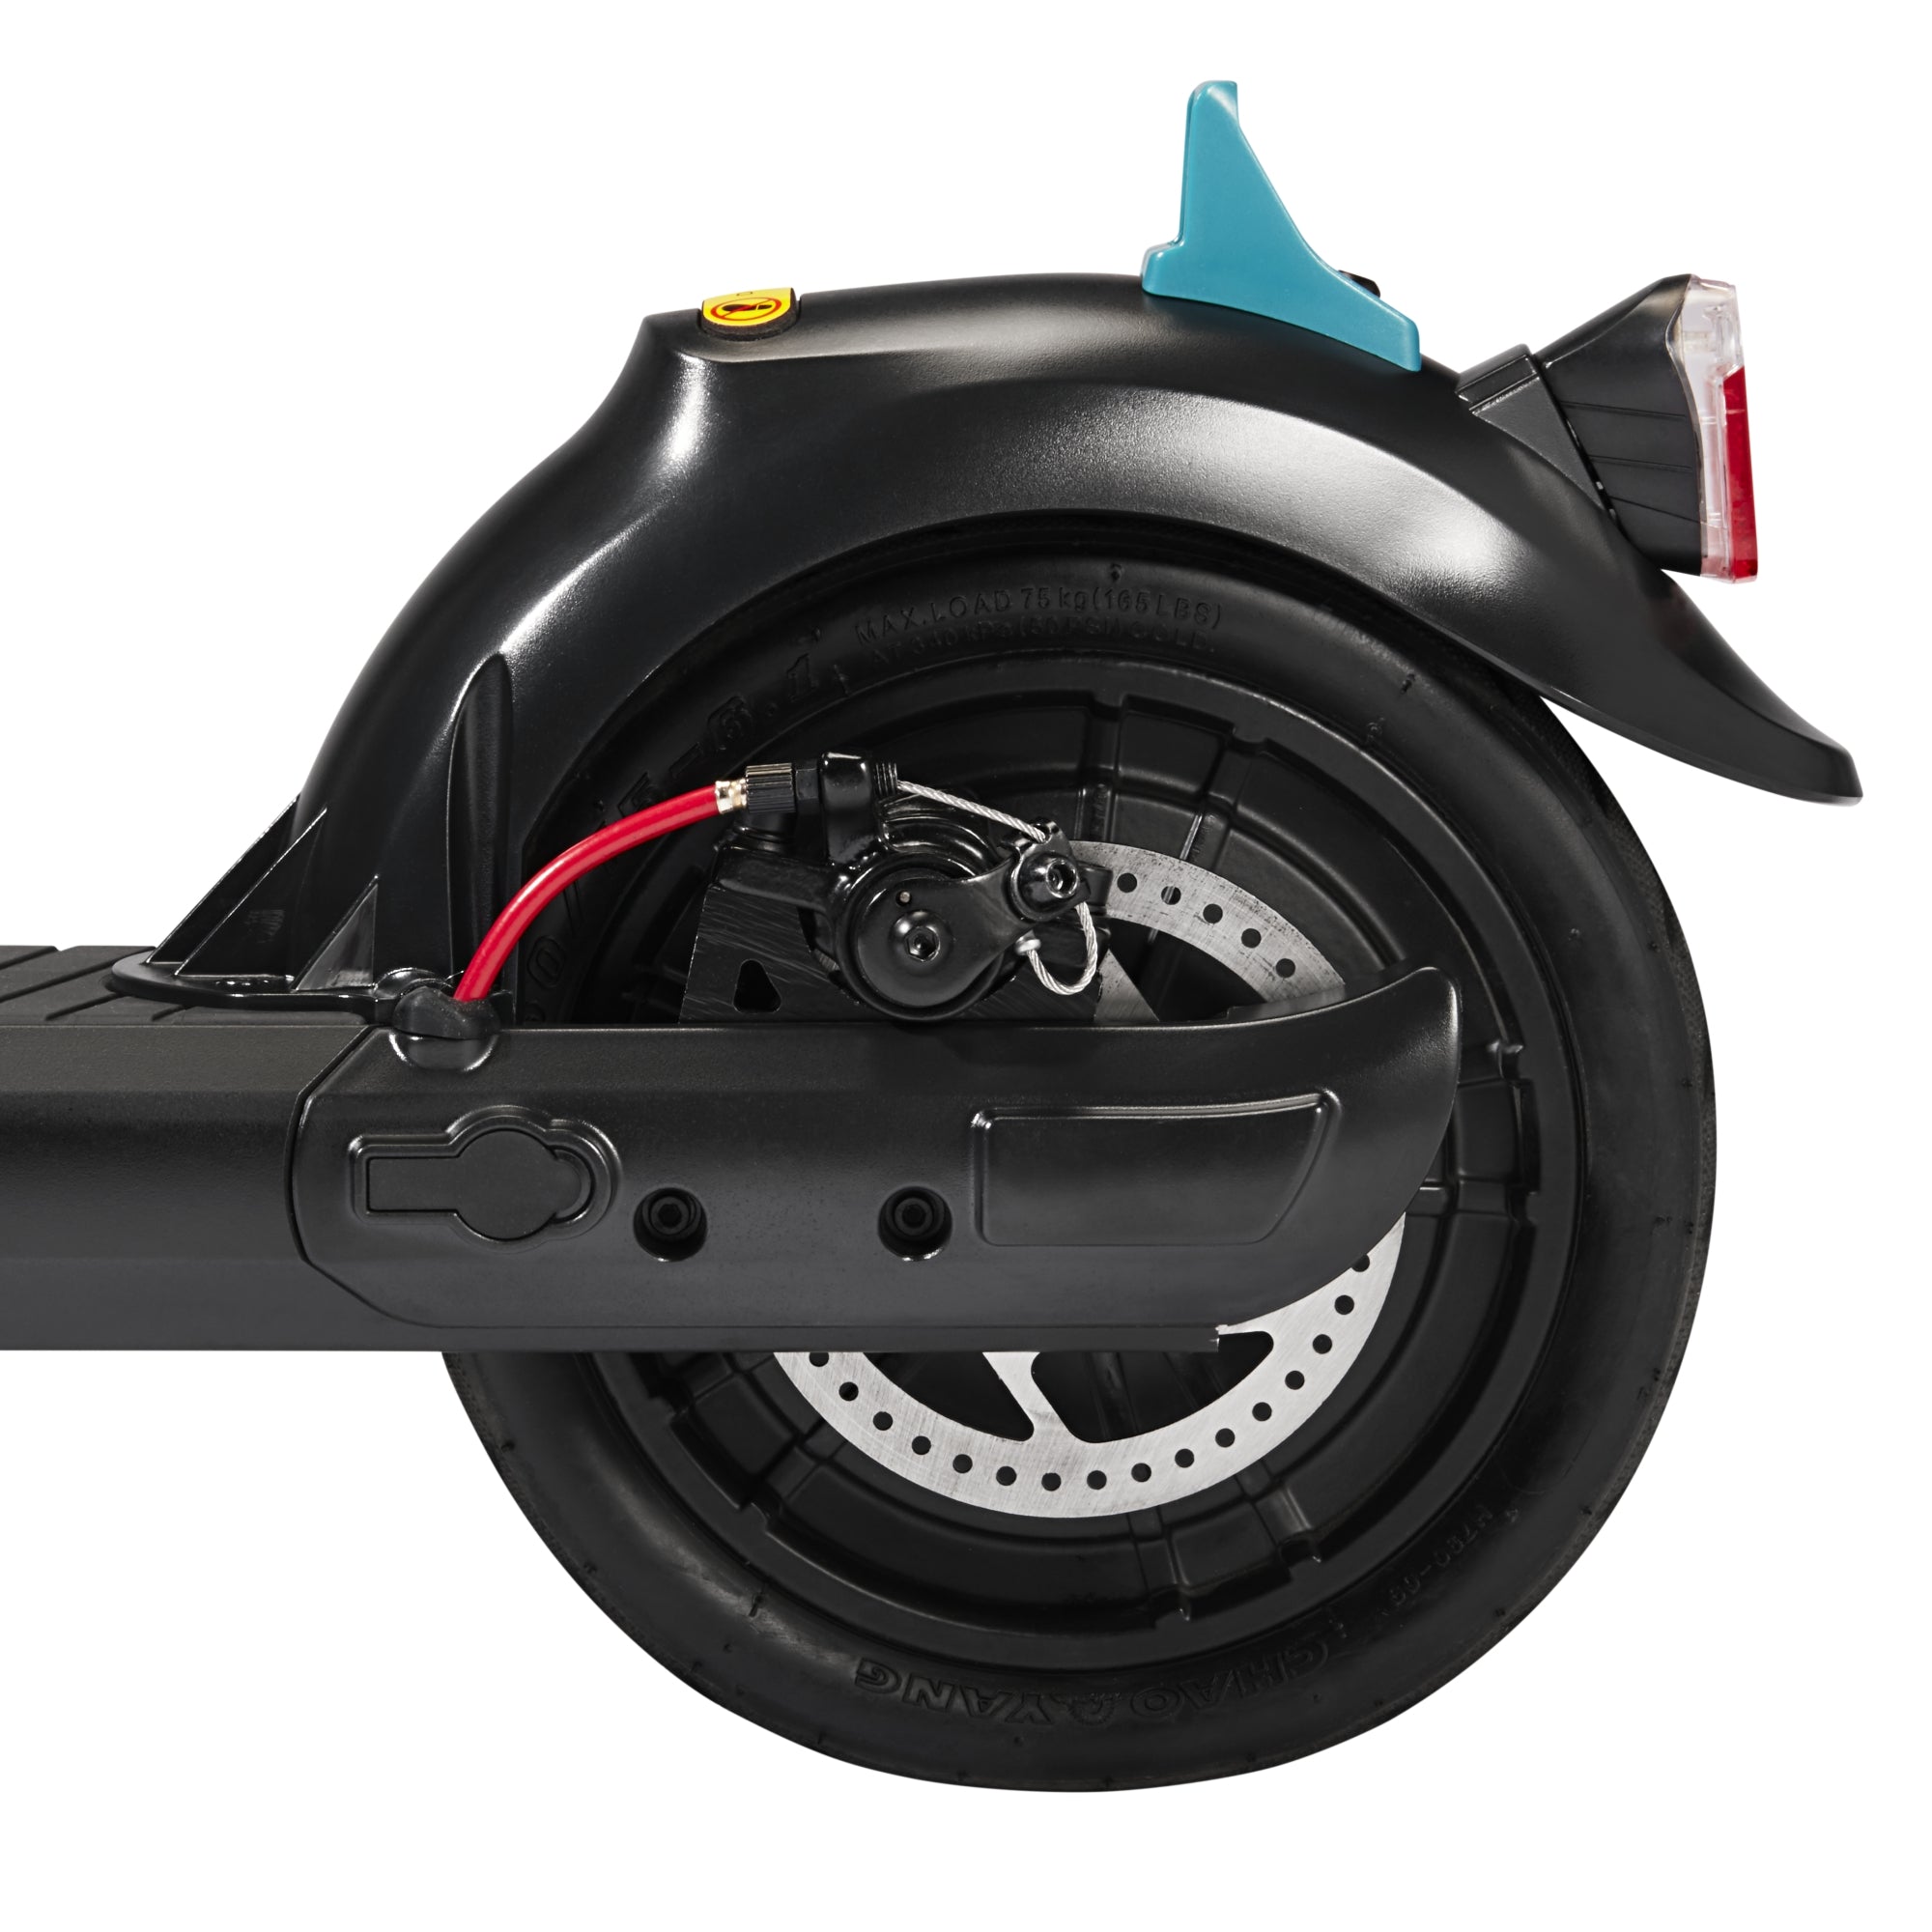 Refurbished Apex Pro Electric Scooter - GOTRAX